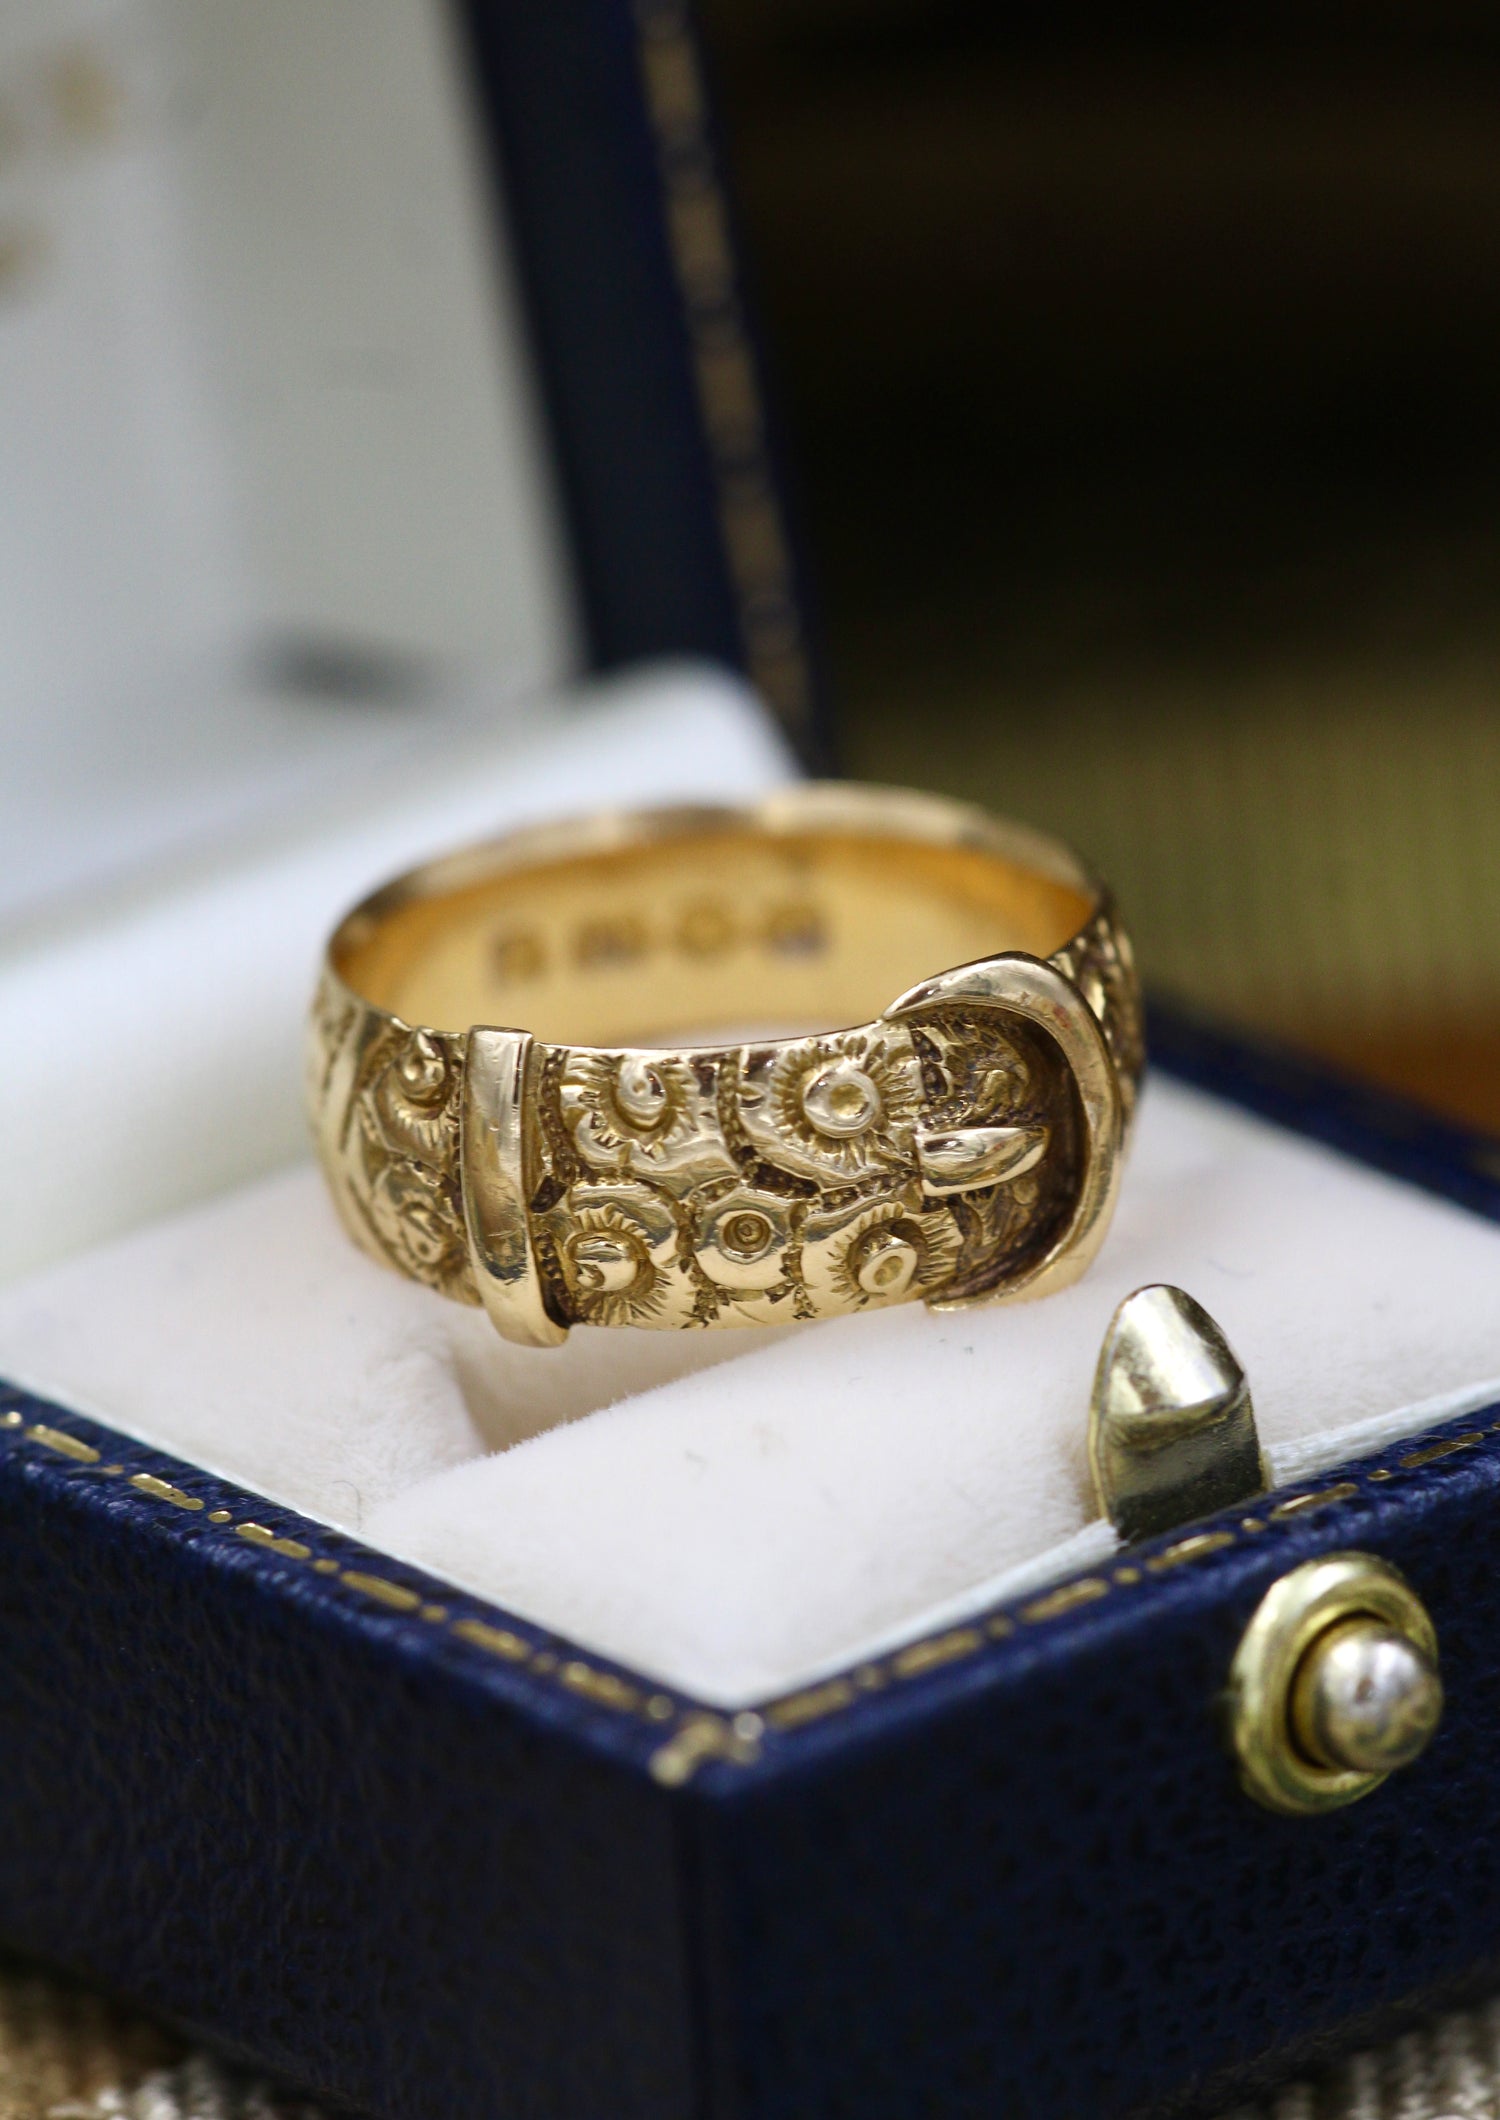 A very fine 18ct Yellow Gold Victorian Hand & Finely Engraved Belt Ring. Hallmarked London 1887 - Robin Haydock Antiques